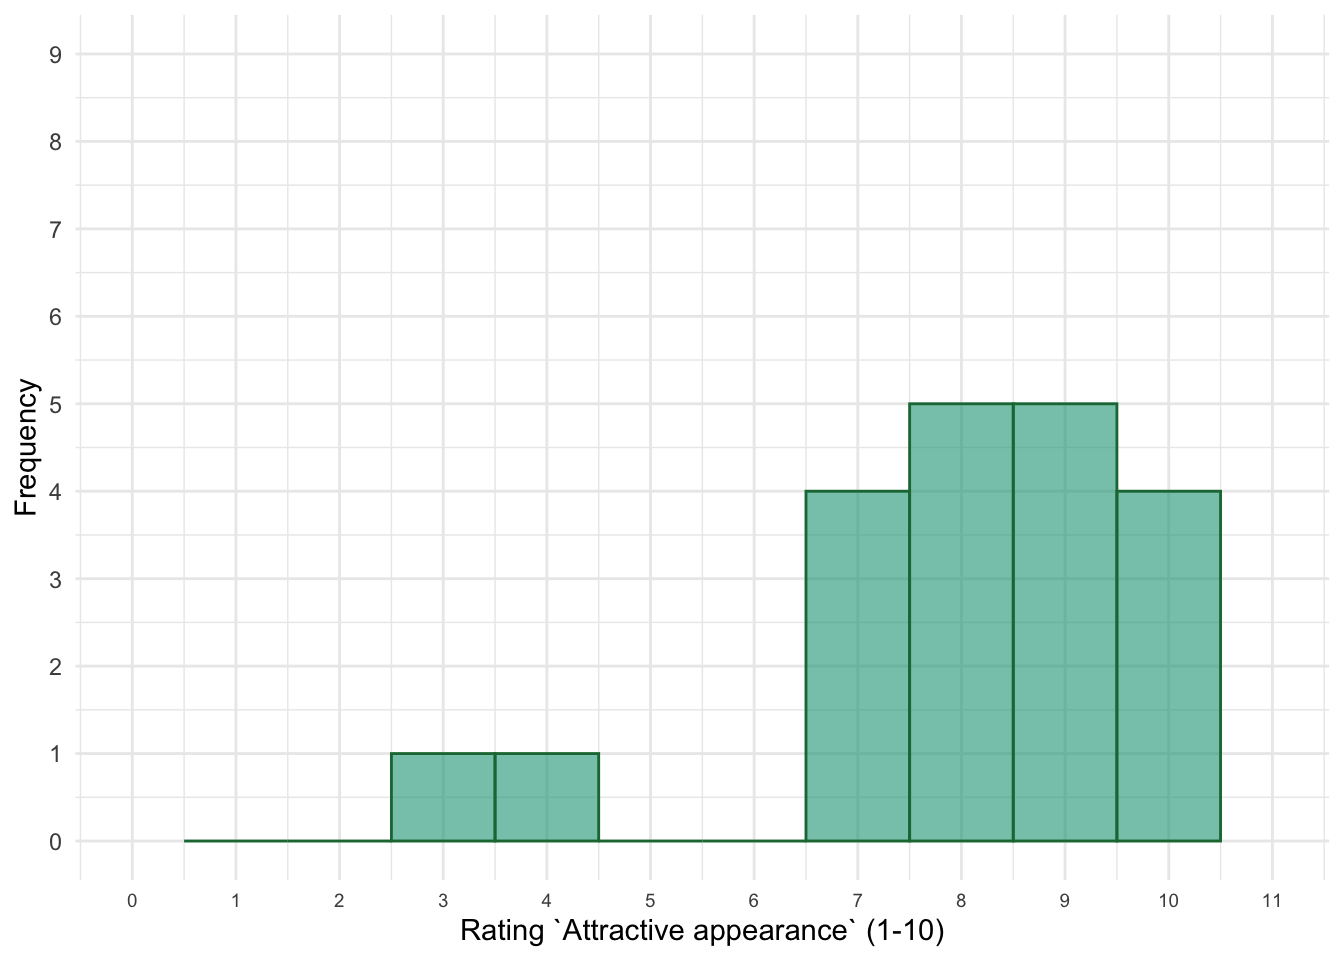 Histogram of ratings of the importance of an attractive appearance in a relationship partner